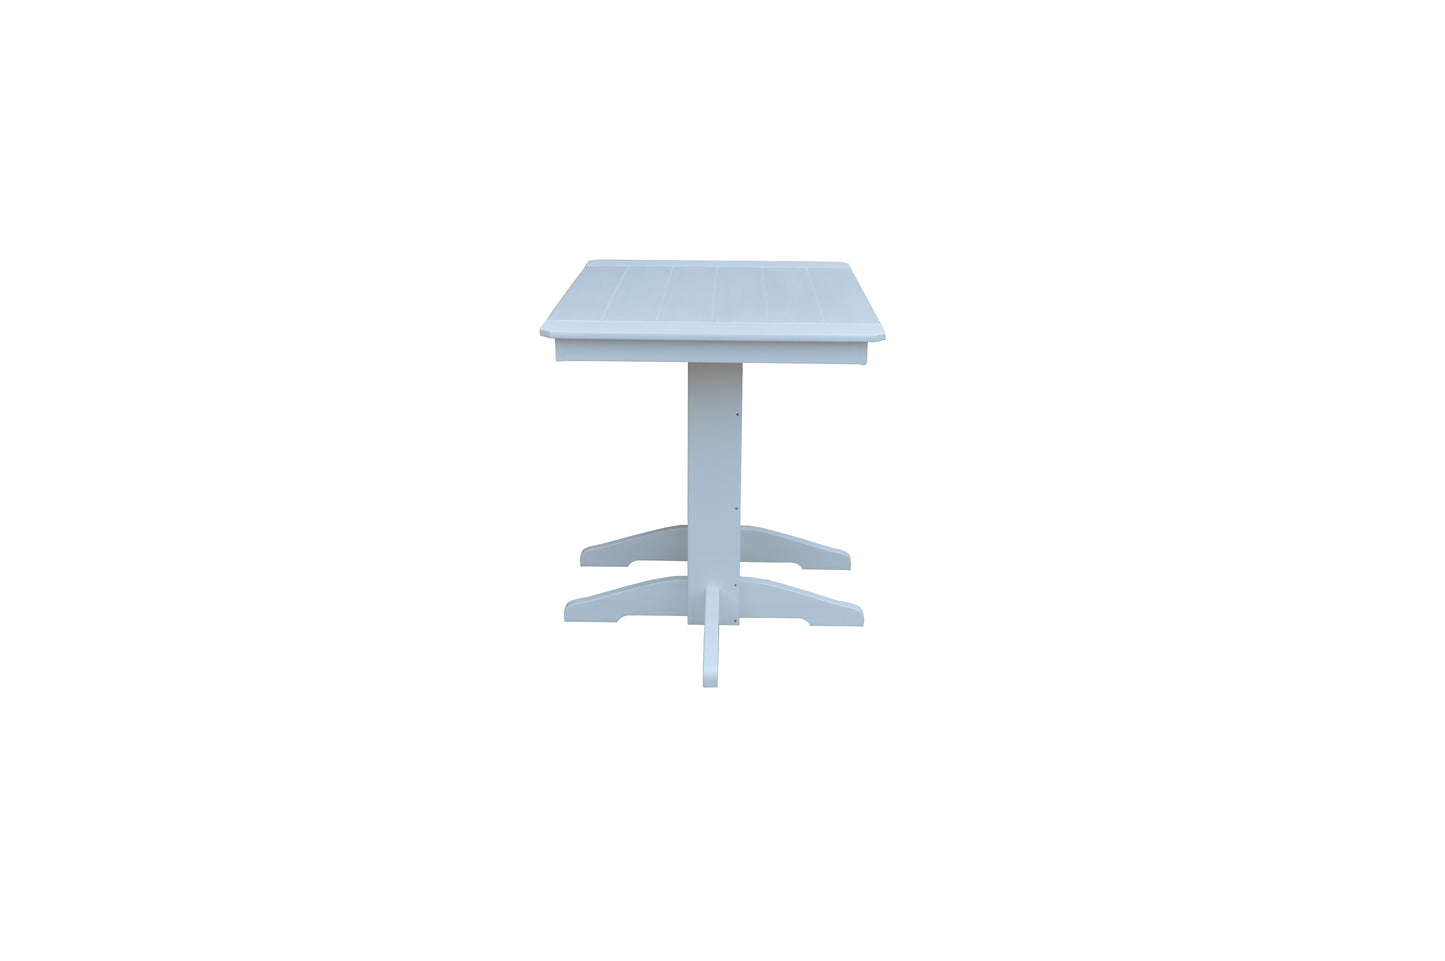 A&L Furniture Co. Recycled Plastic 4' Table (COUNTER HEIGHT) - LEAD TIME TO SHIP 10 BUSINESS DAYS